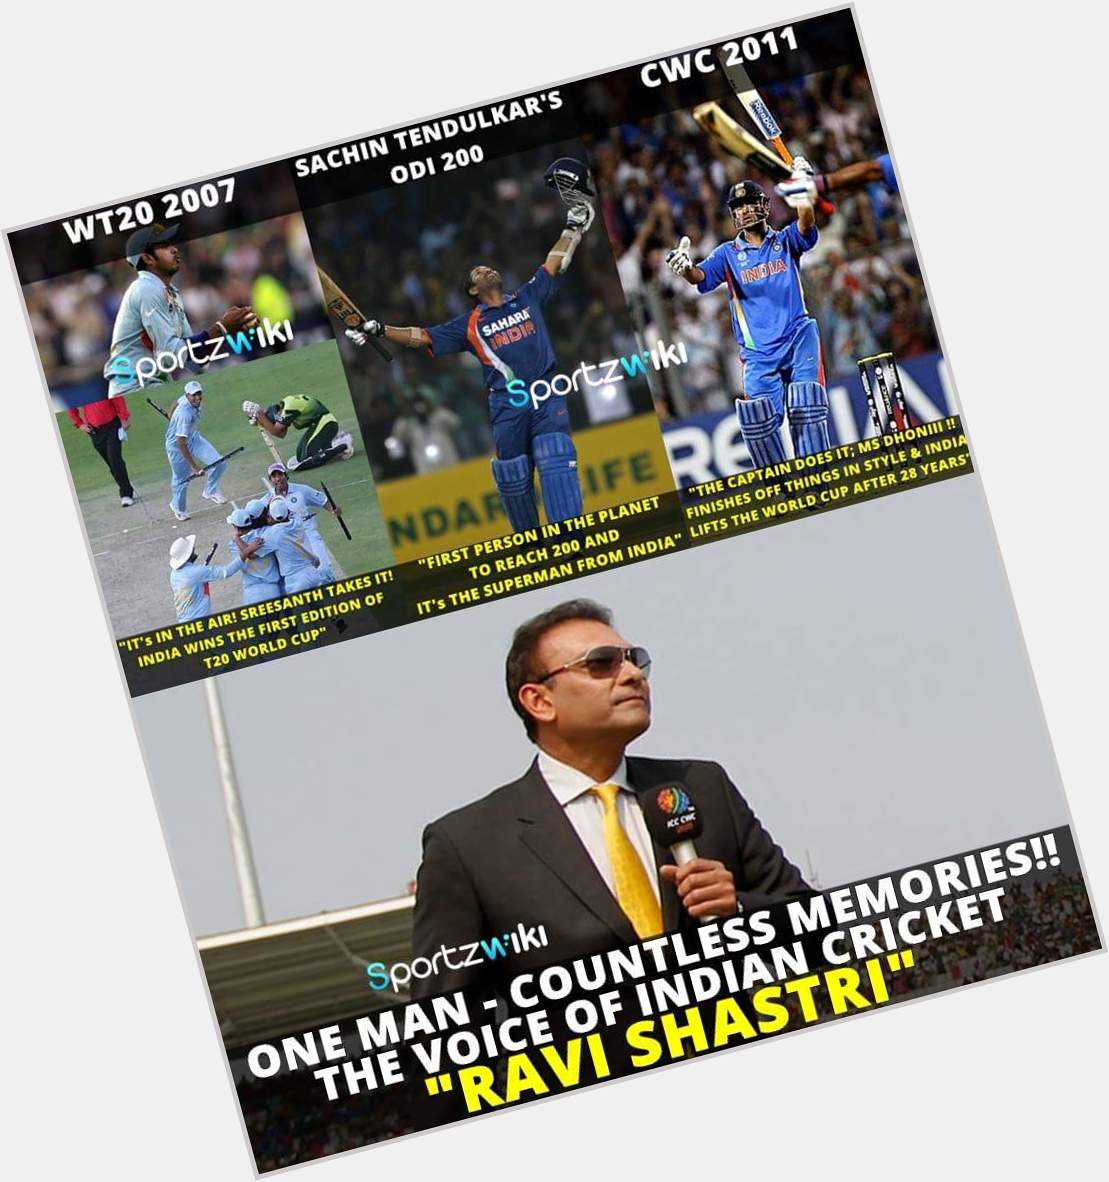 Remember that awesome commentary by Ravi Shastri? 

Happy birthday the Voice of Indian cricket, Ravi Shastri ! 